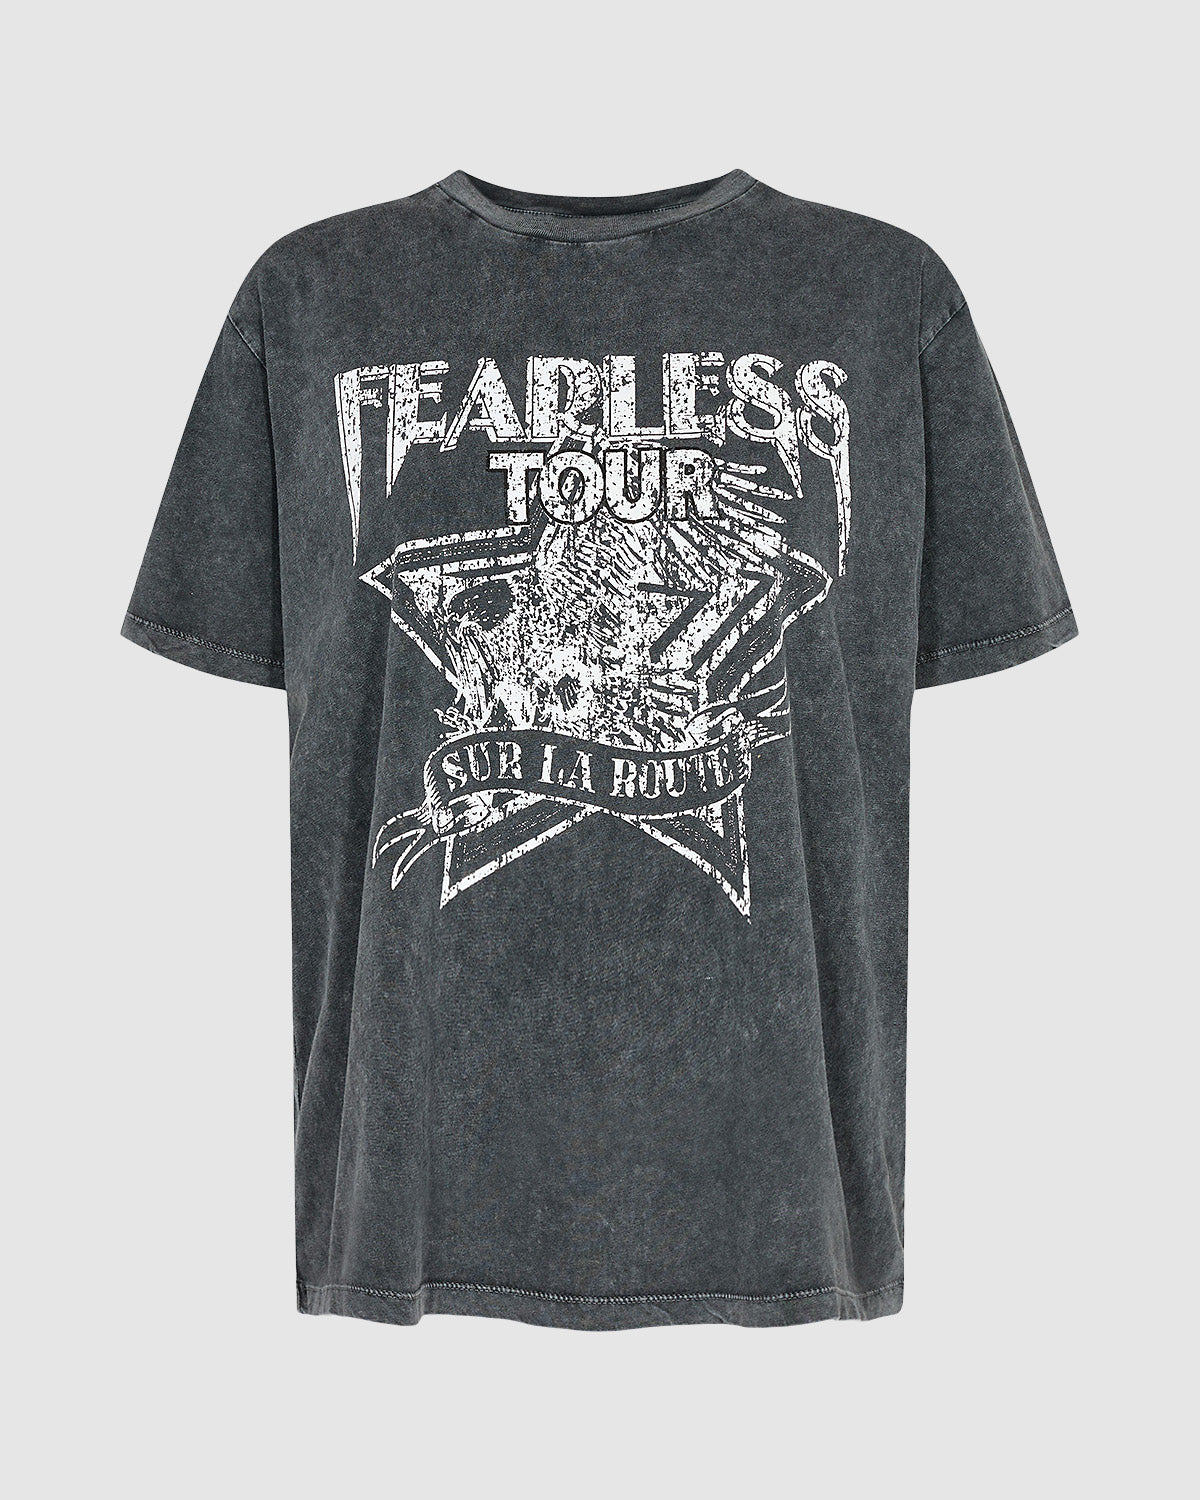 TMFEARLESS T-Shirt